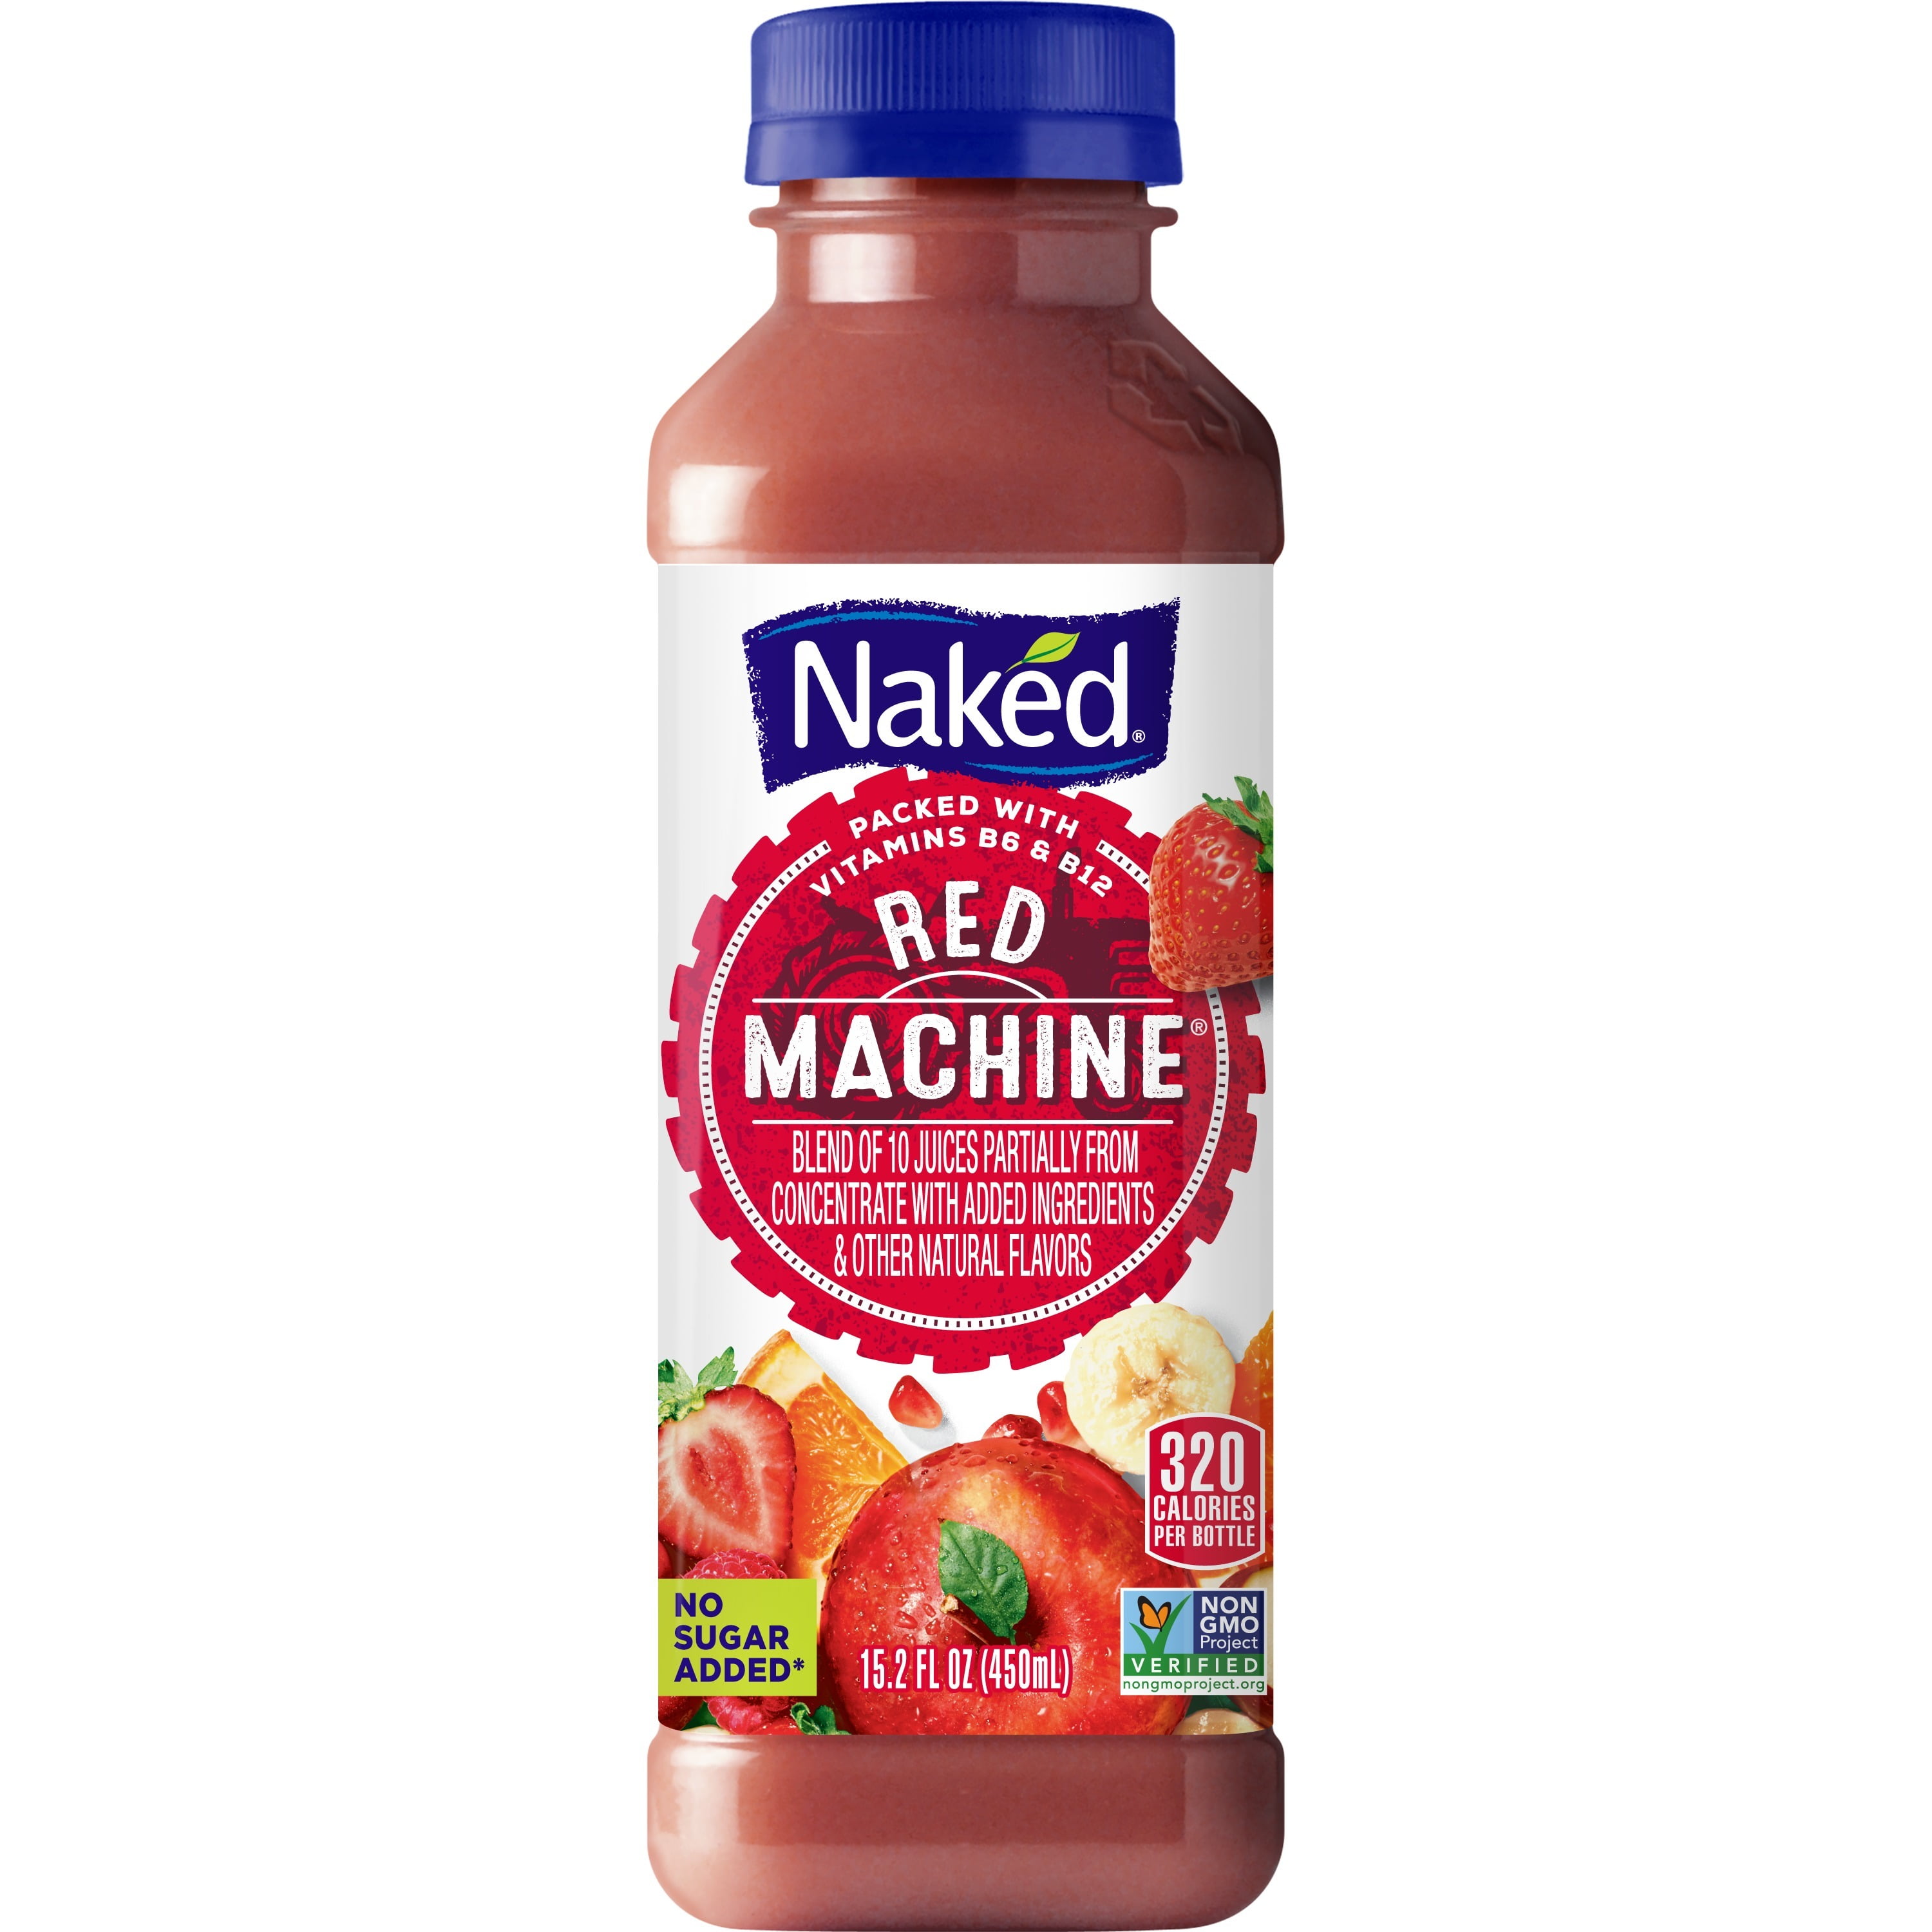 Naked Juice Boosted Smoothie Red Machine 15 2 Oz Bottle Walmart